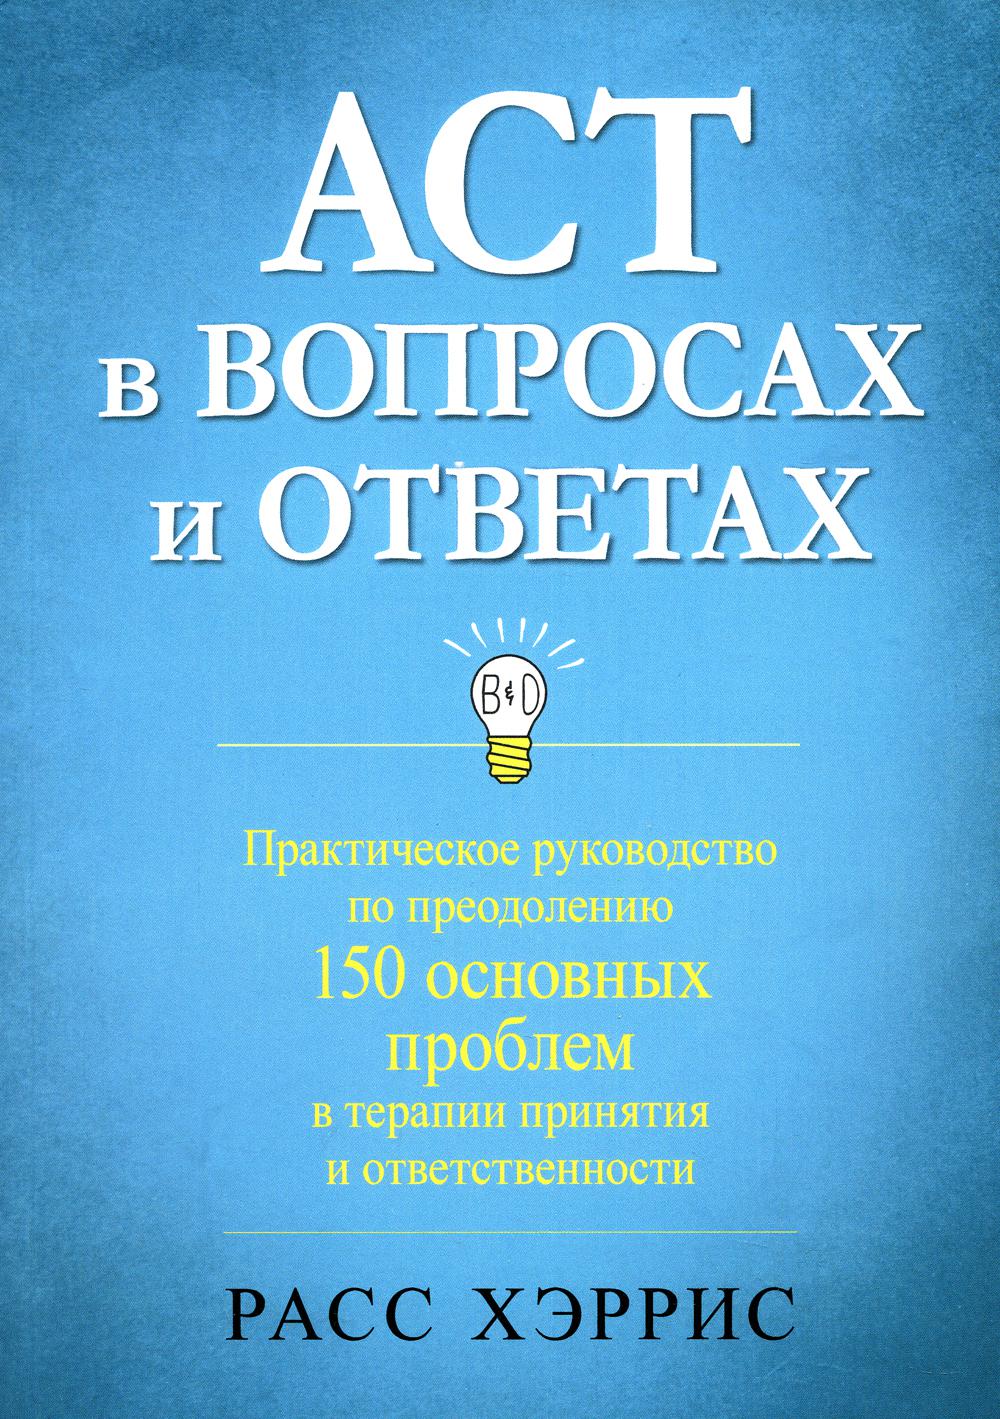 ACT    .     150       